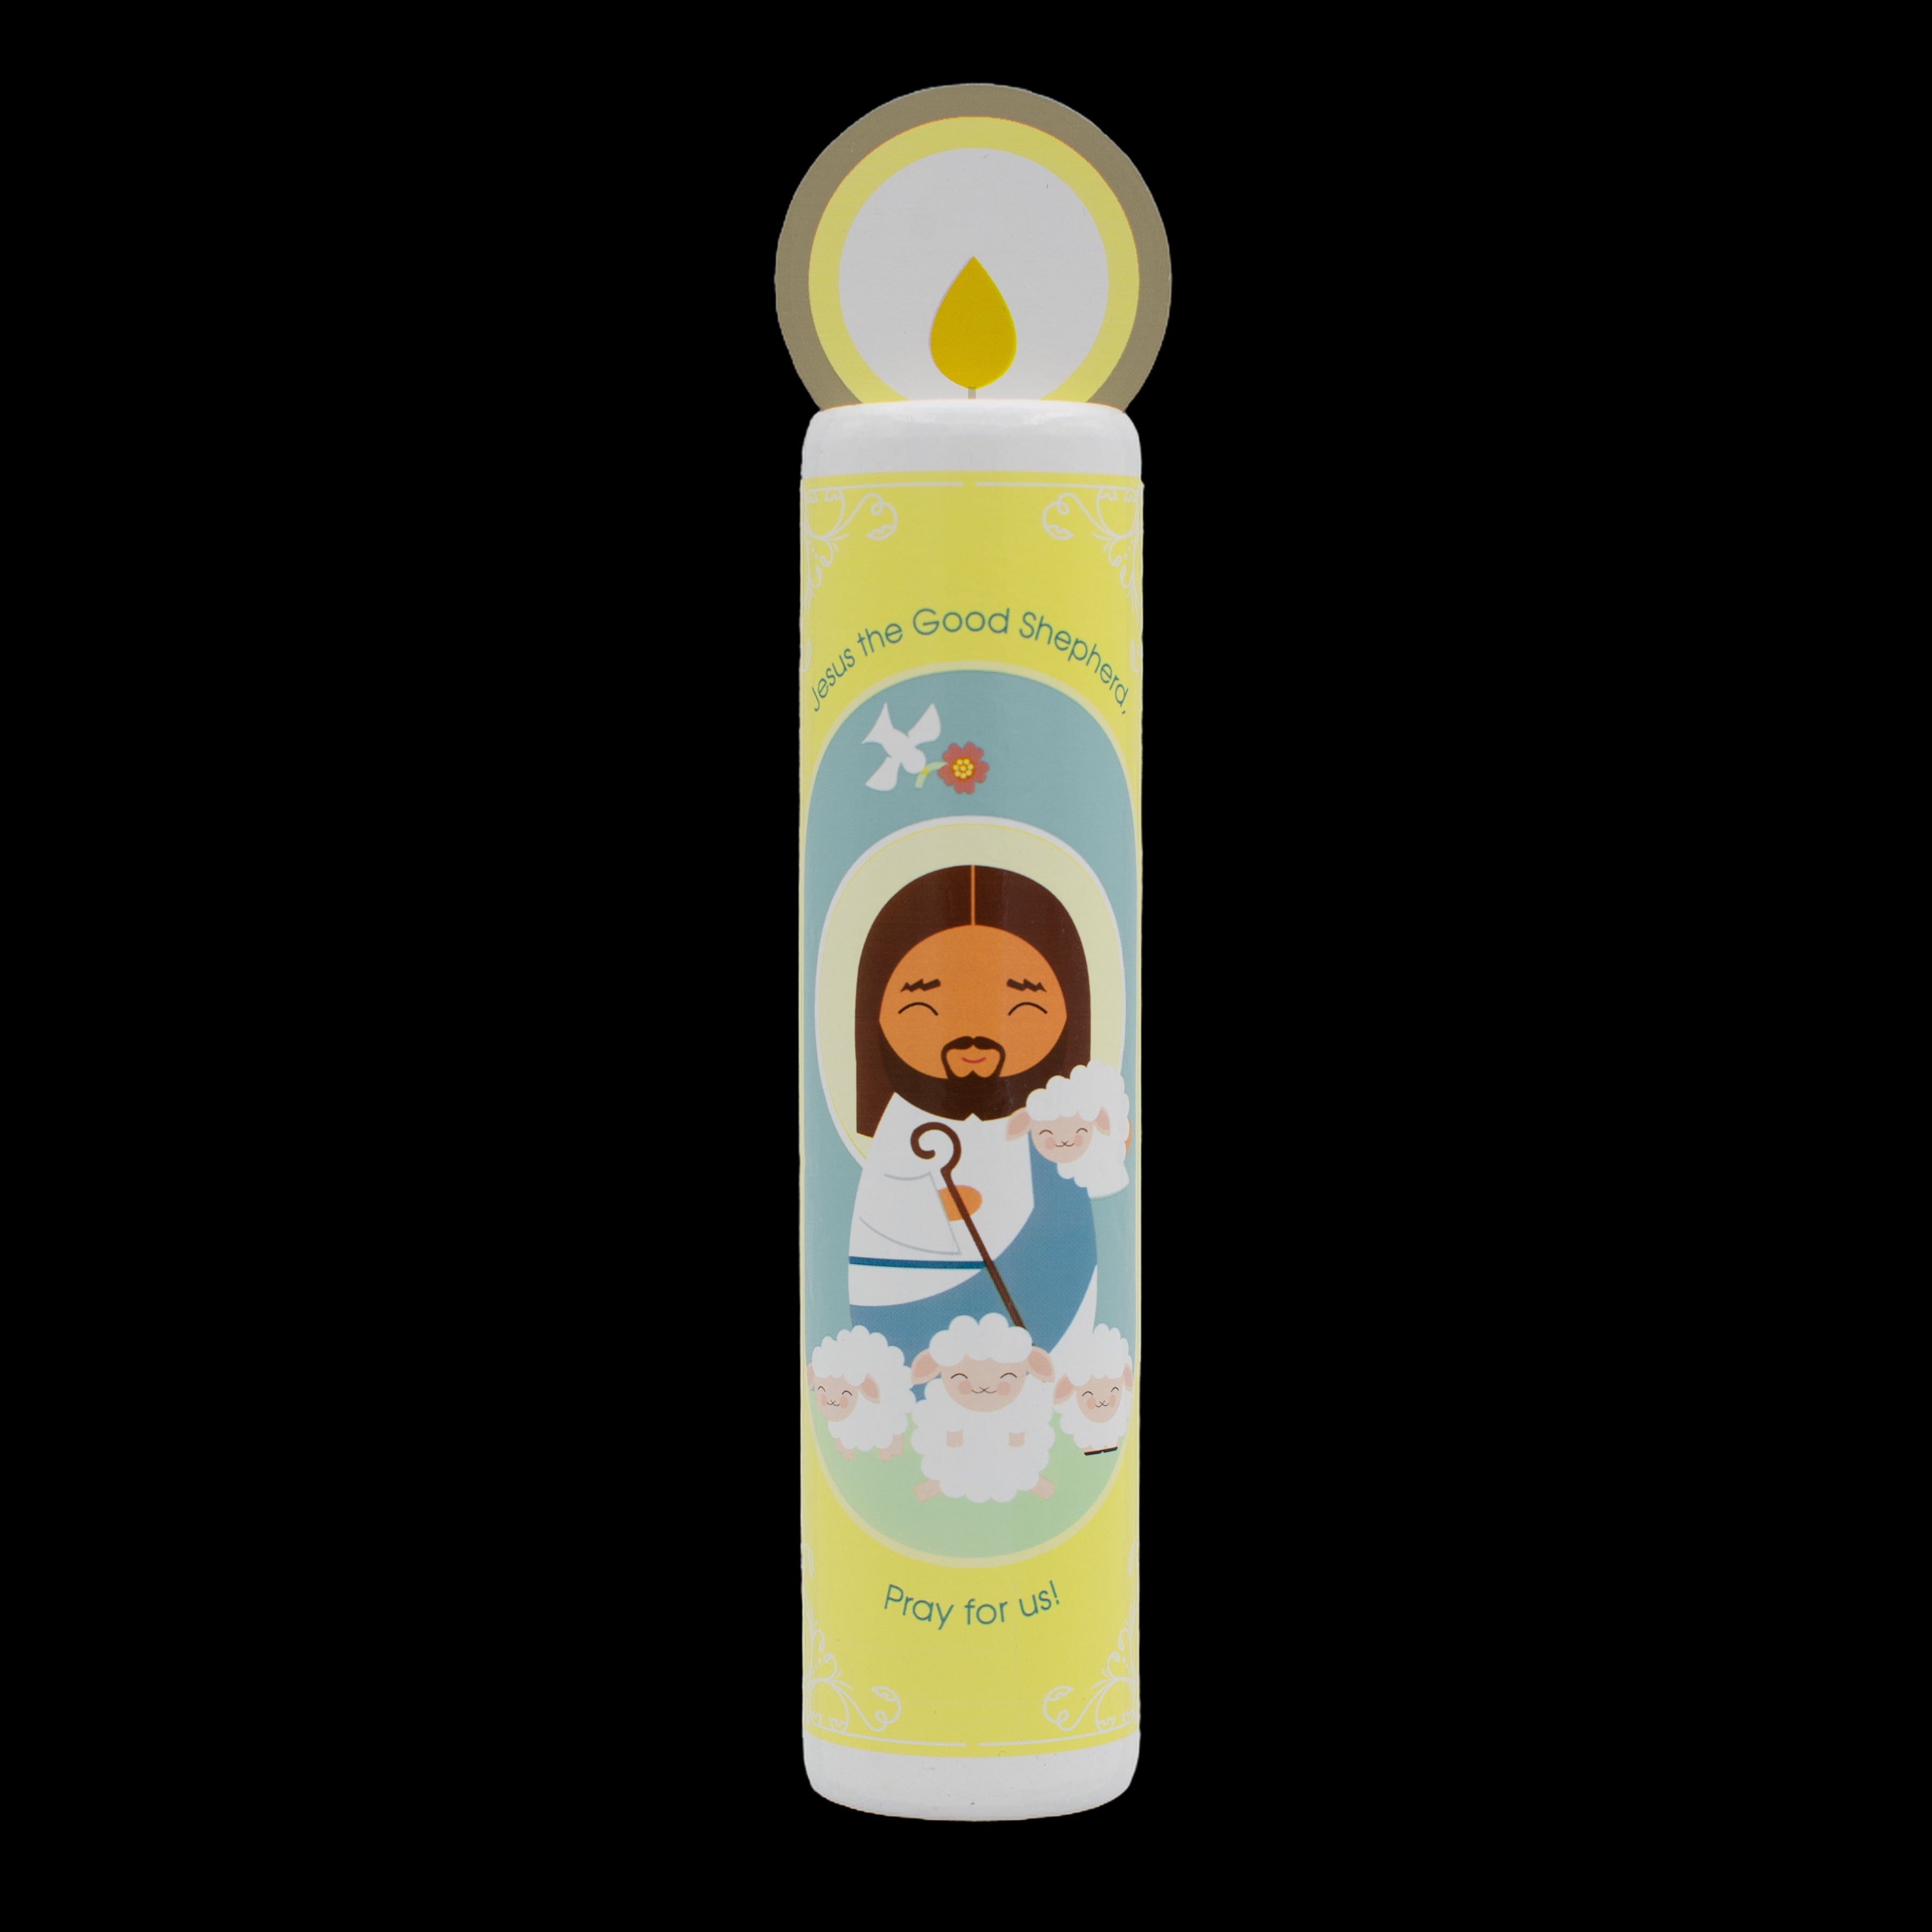 Jesus Christ, The Good Shepherd (The Our Father) Wooden Prayer Candle